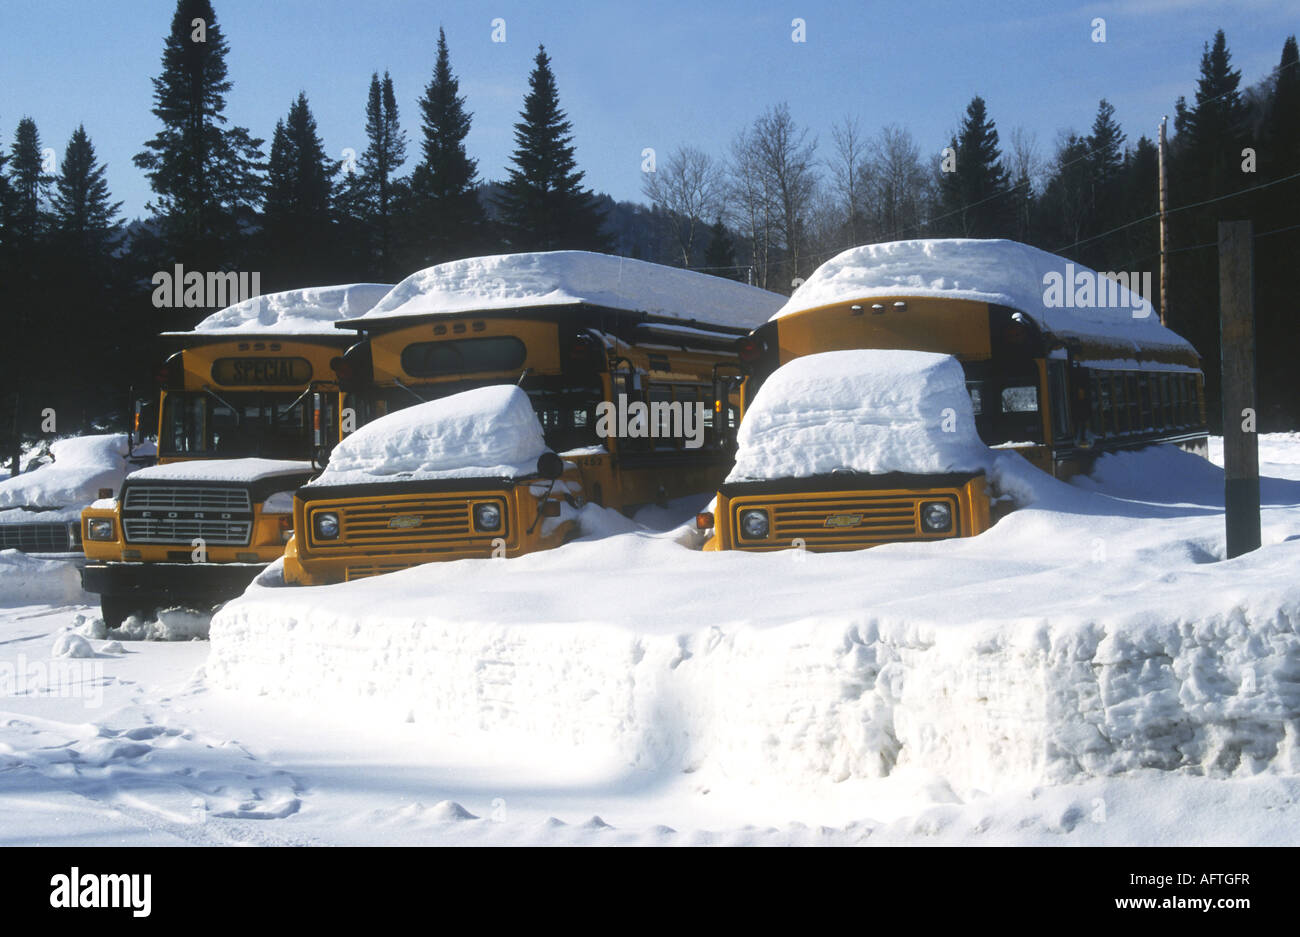 Overnight snow on School buses in Quebec, Canada Stock Photo